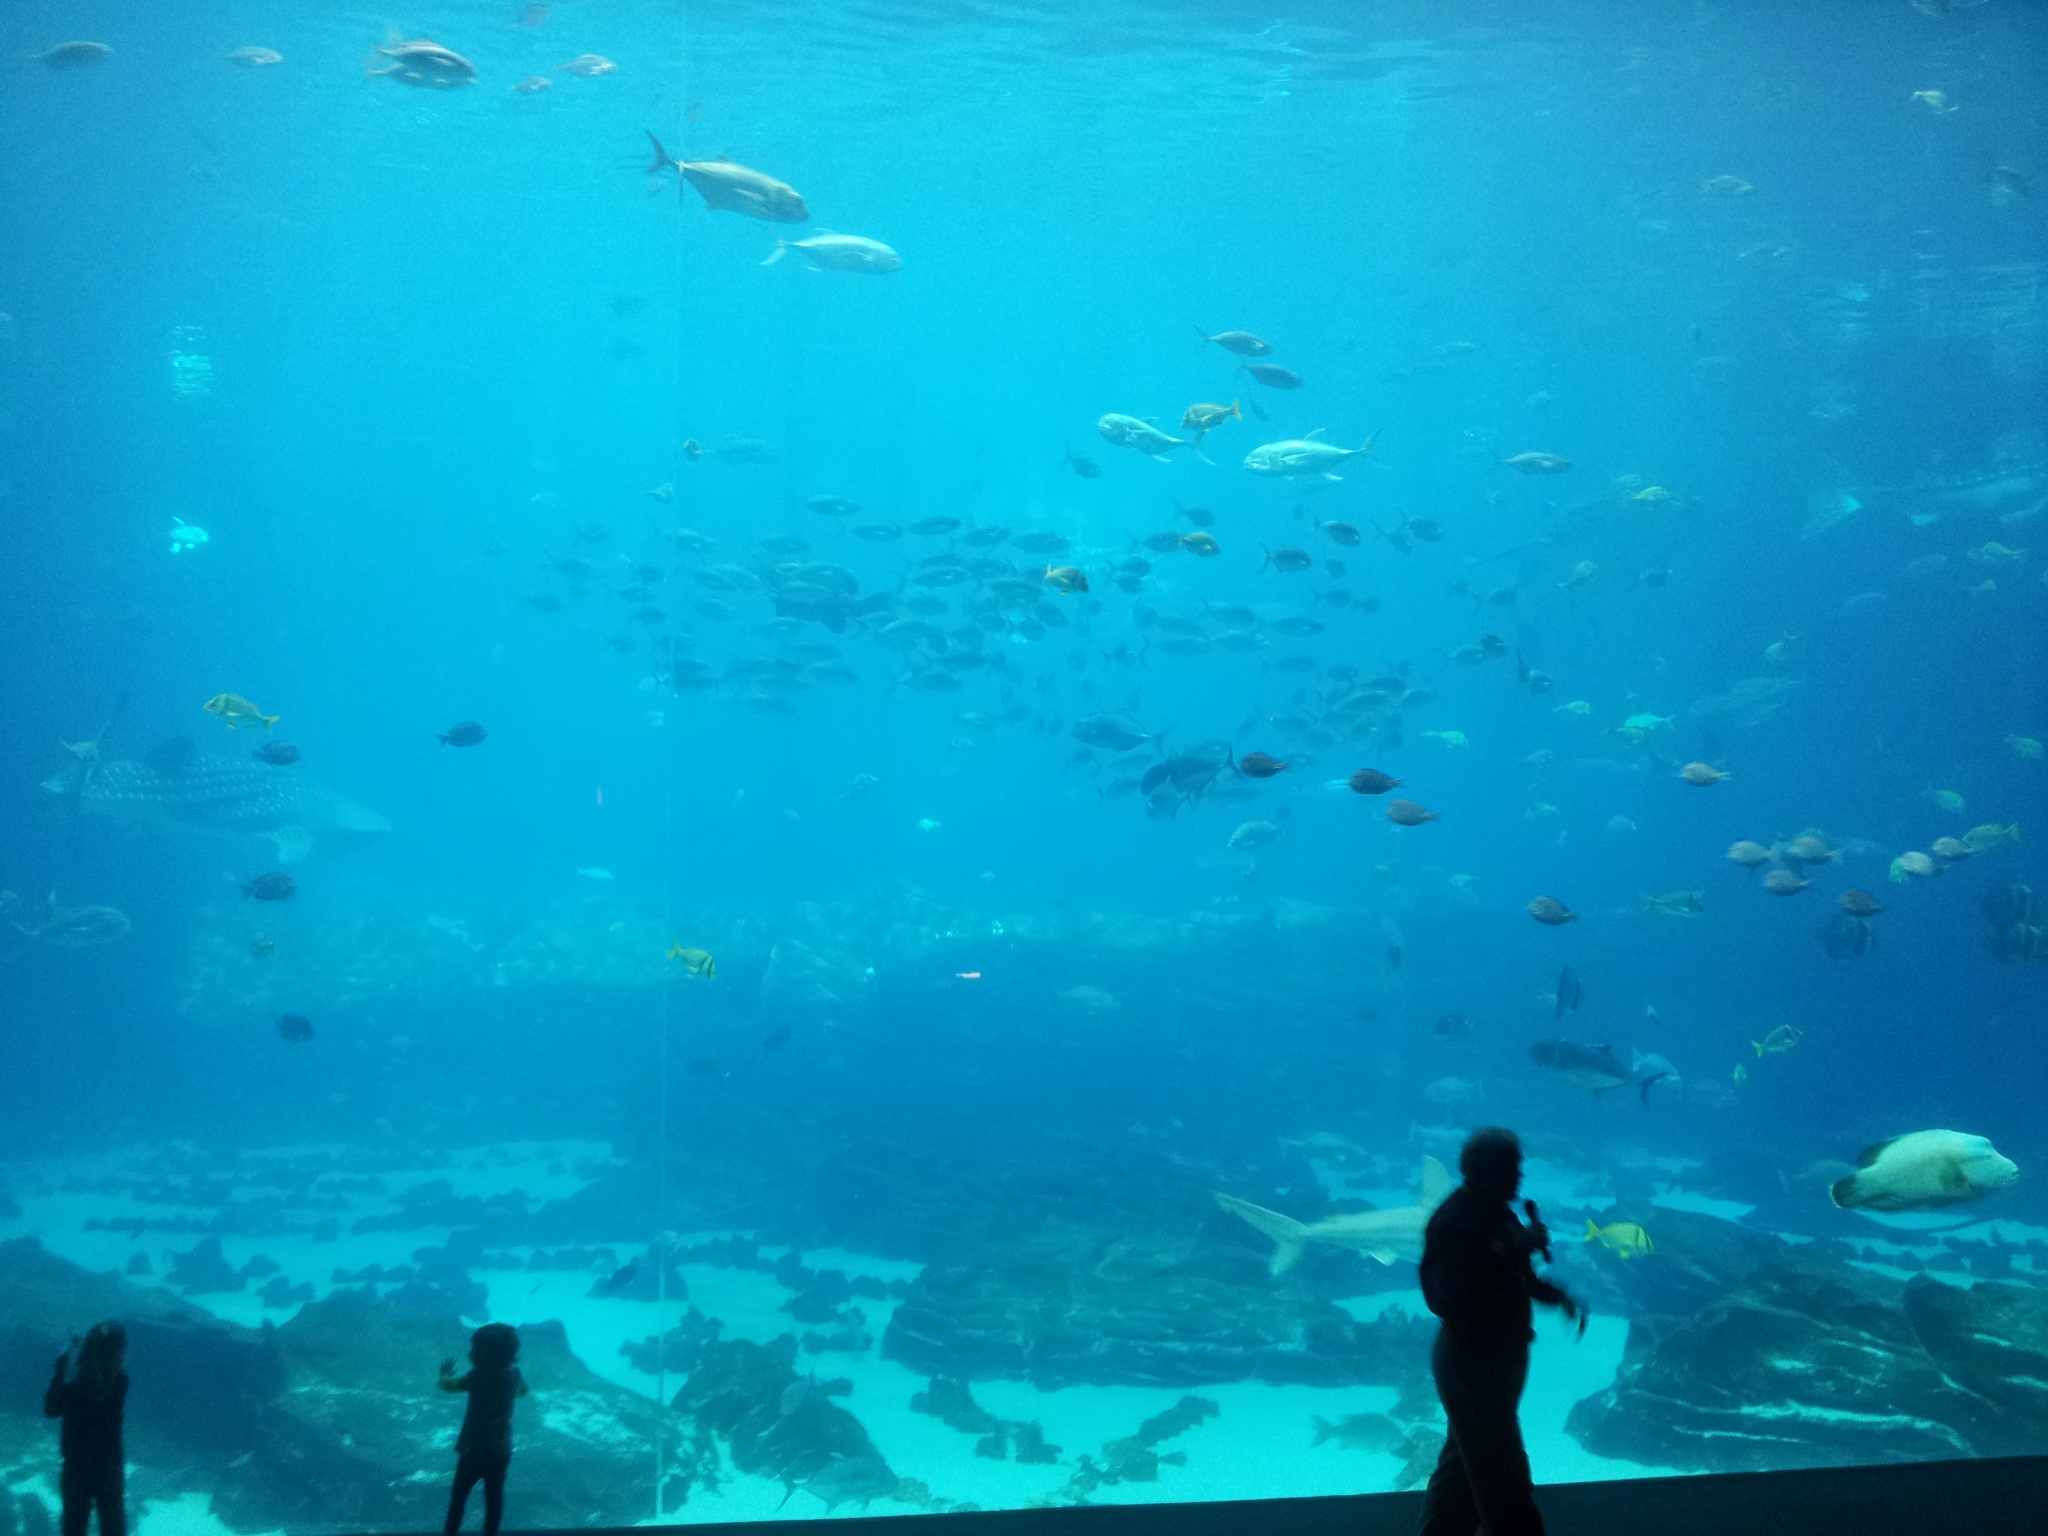 a person taking a po of a large aquarium